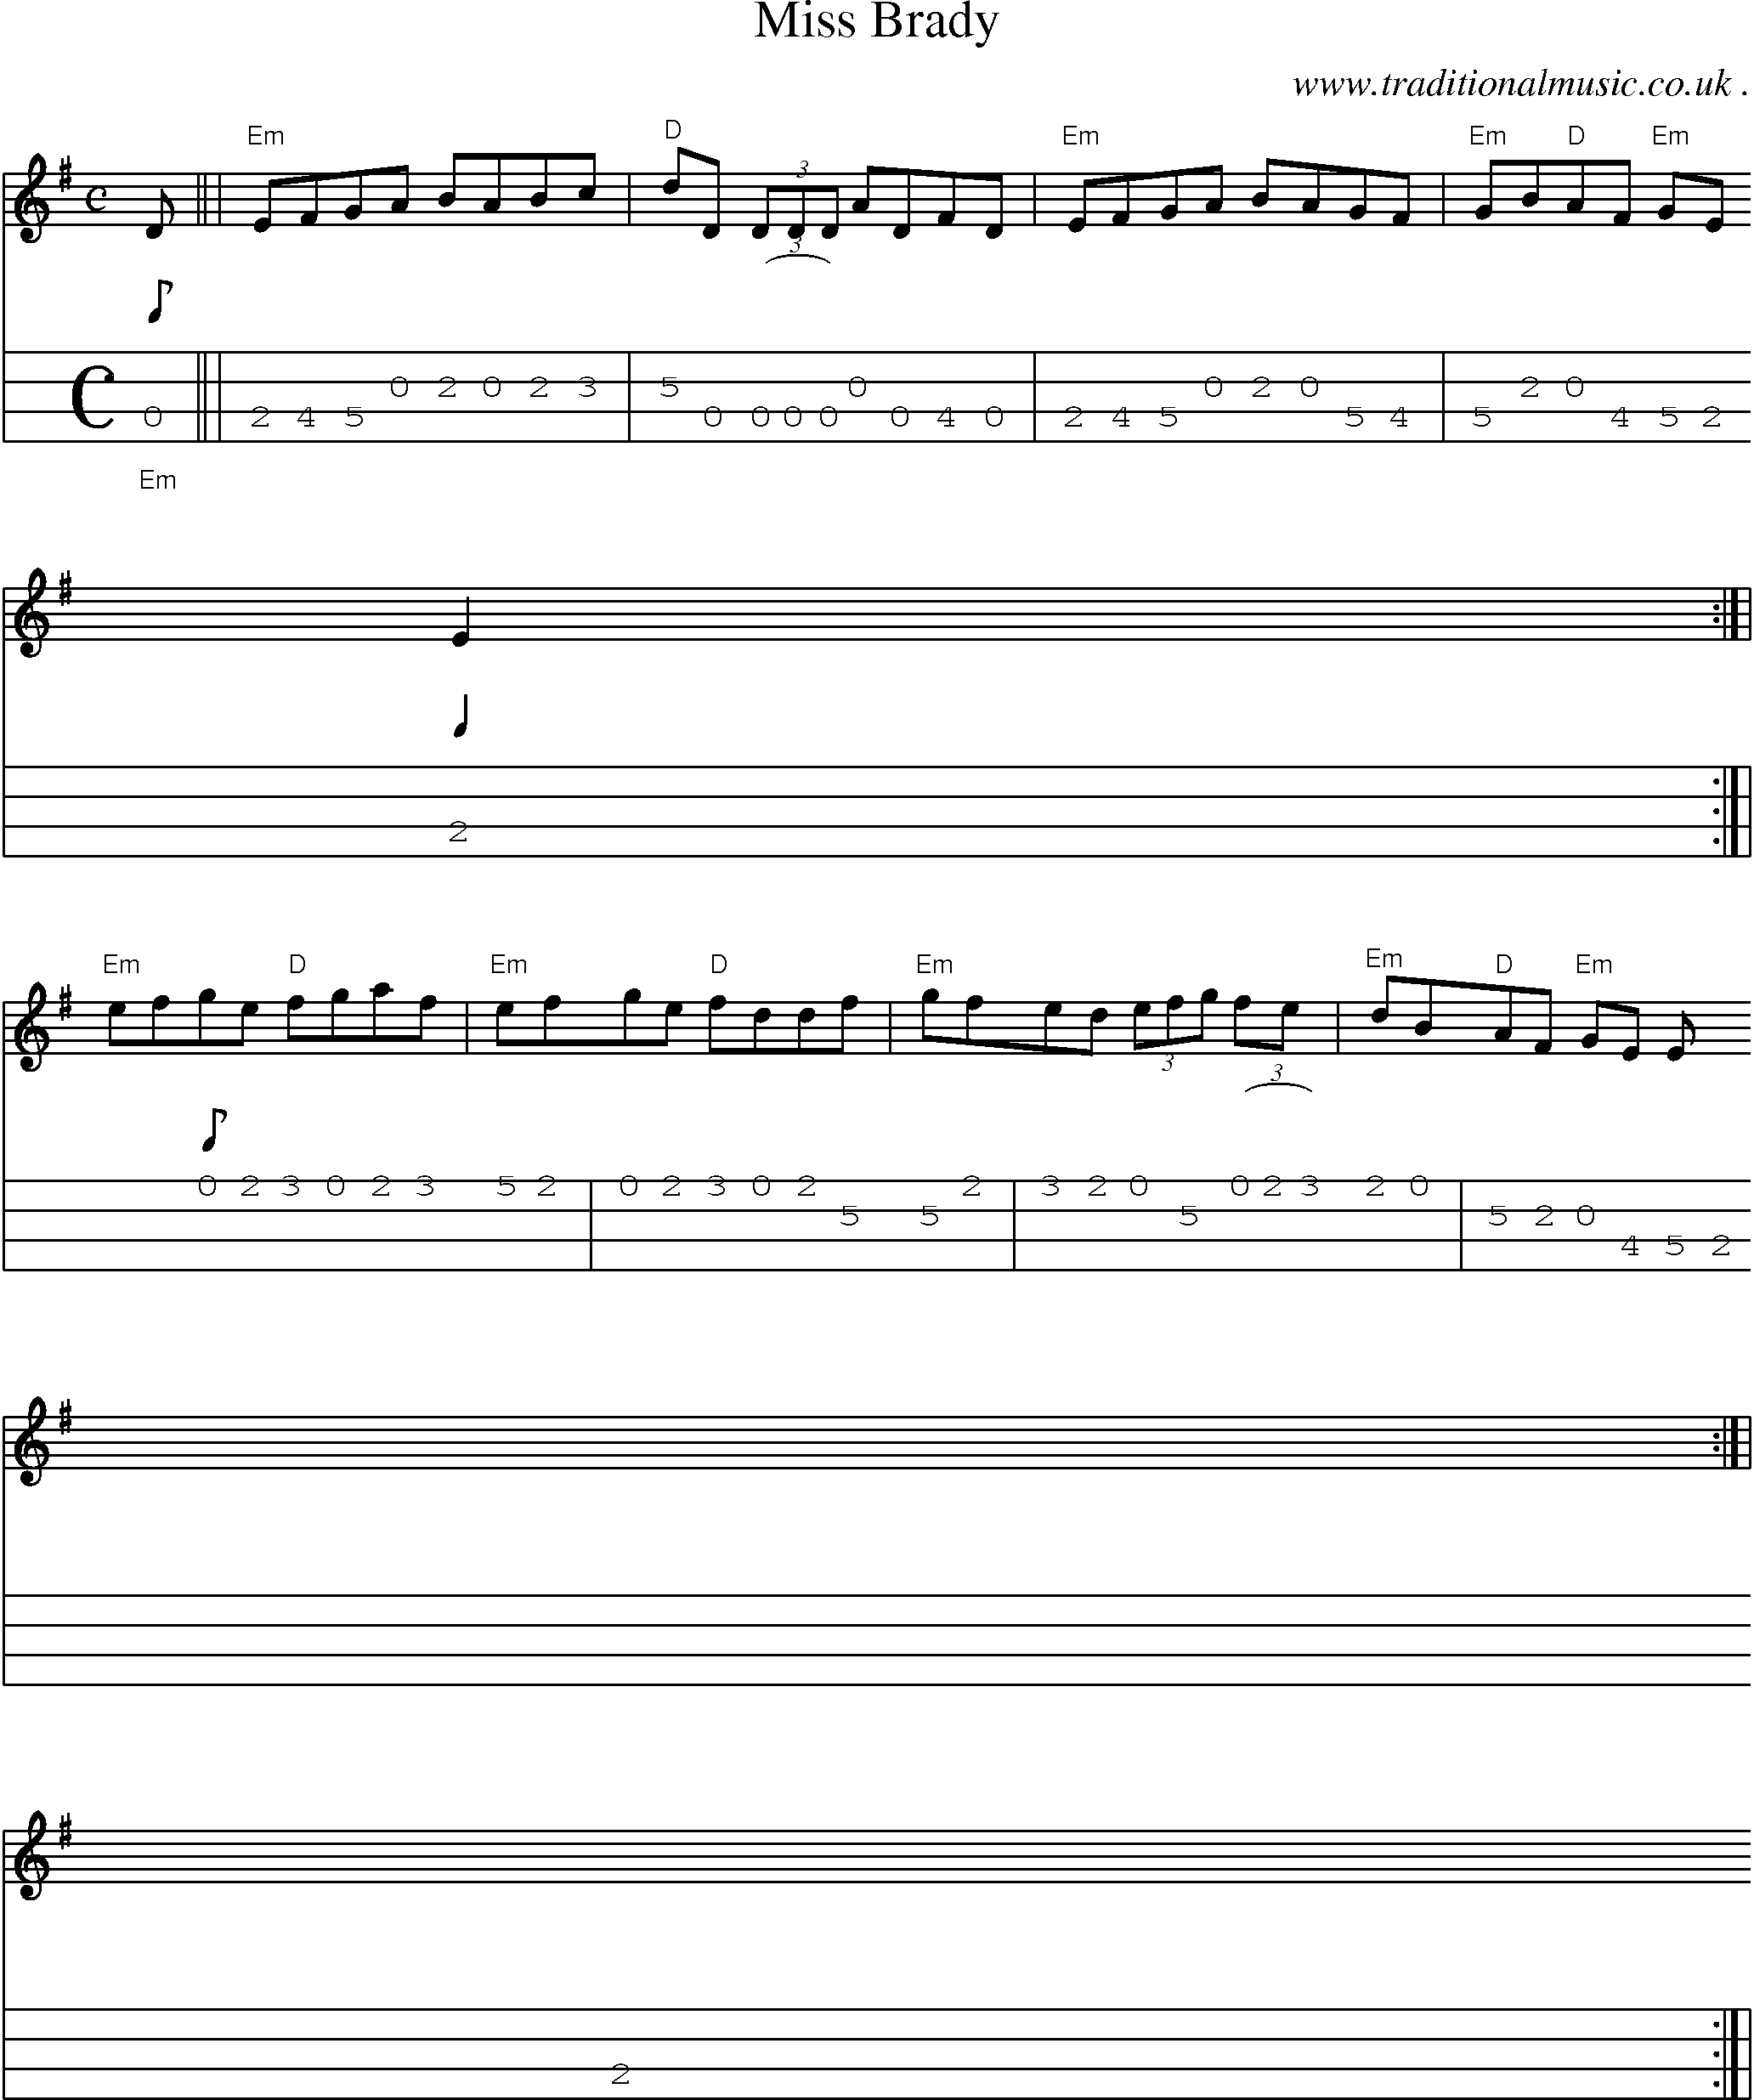 Sheet-music  score, Chords and Mandolin Tabs for Miss Brady